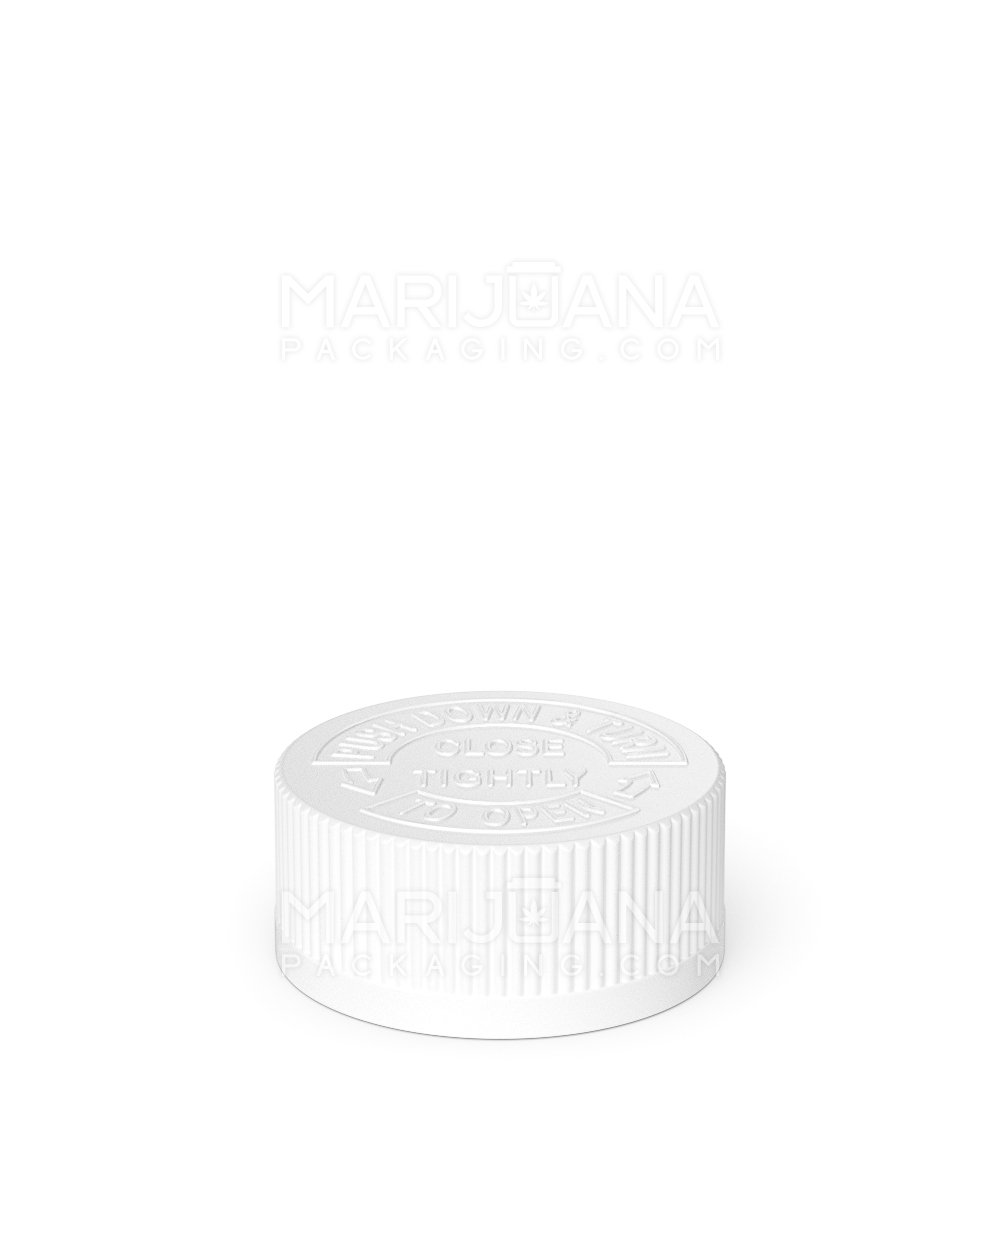 Child Resistant | Ribbed Push Down & Turn Plastic Caps | 33mm - Semi Gloss White - 252 Count - 3